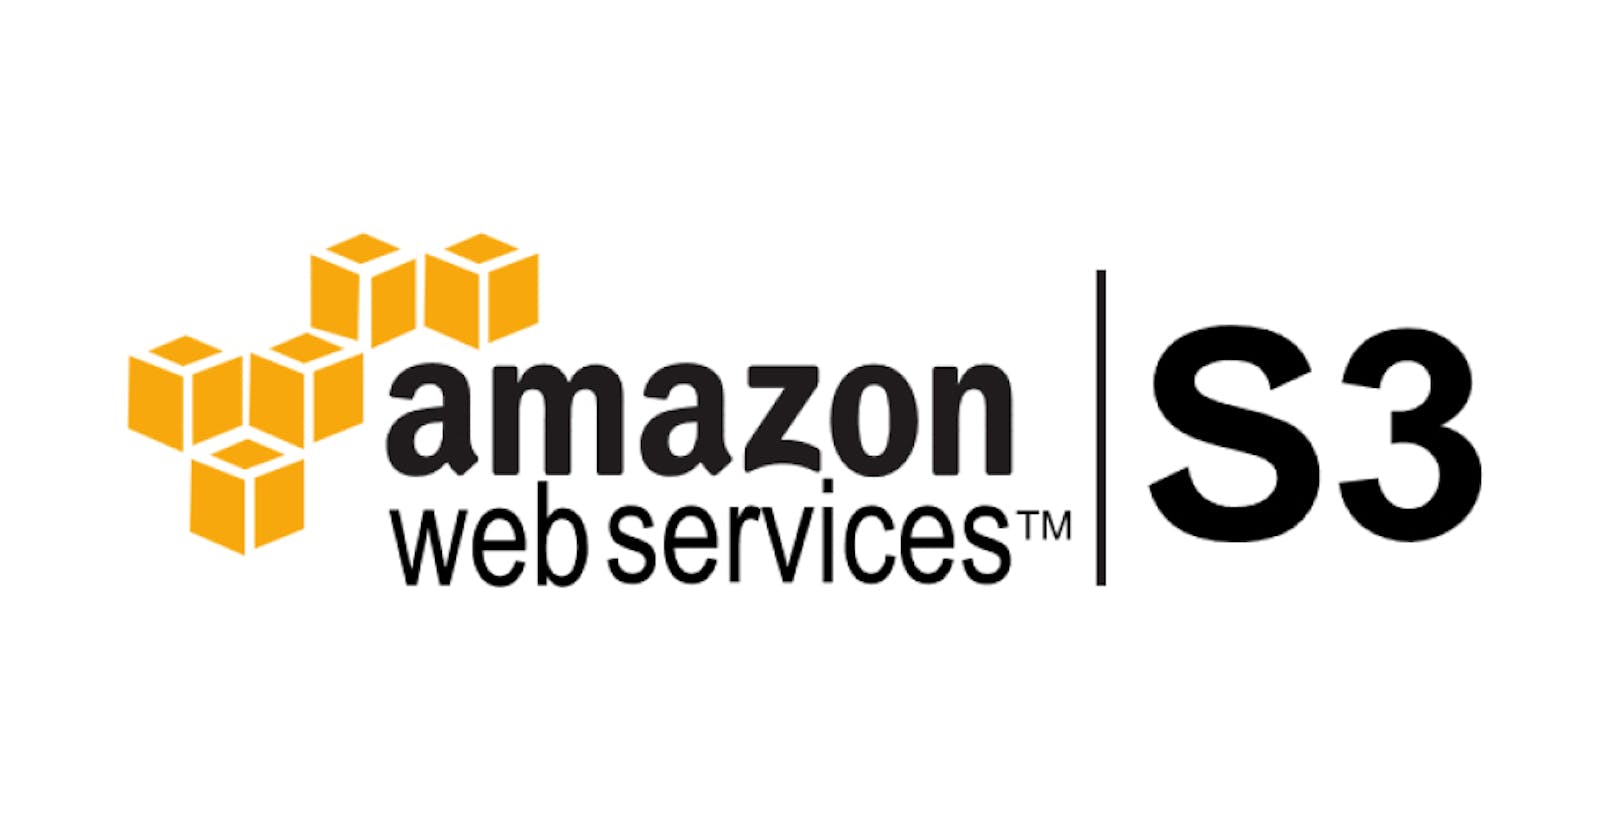 Amazon S3 (Simple Storage Service) in Simple Terms: Your Digital Storage Room in the Cloud ☁️